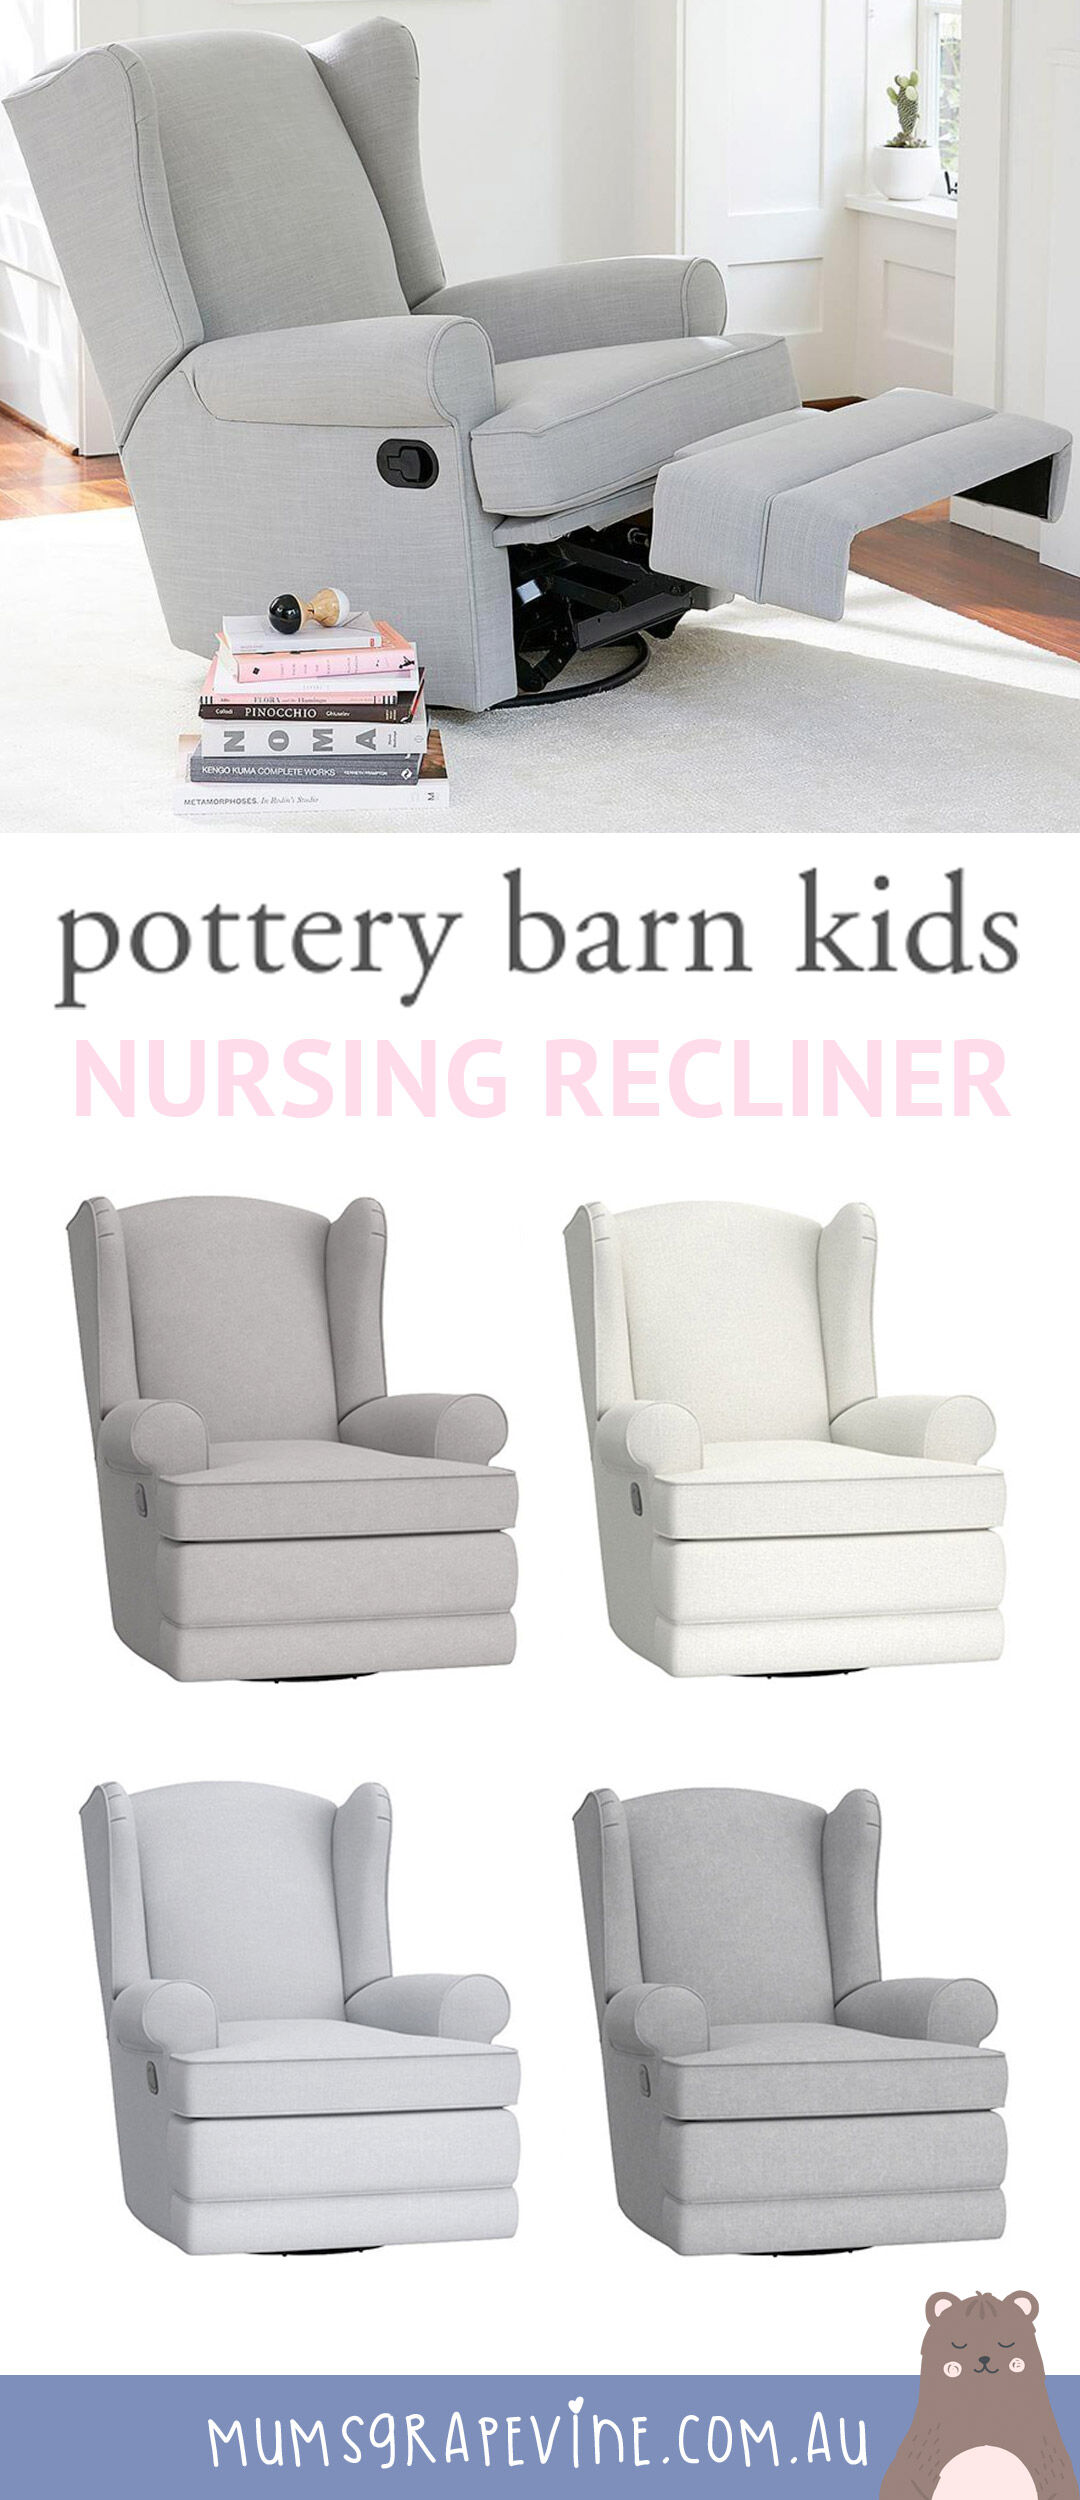 Pottery Barn Kids winged back recliner